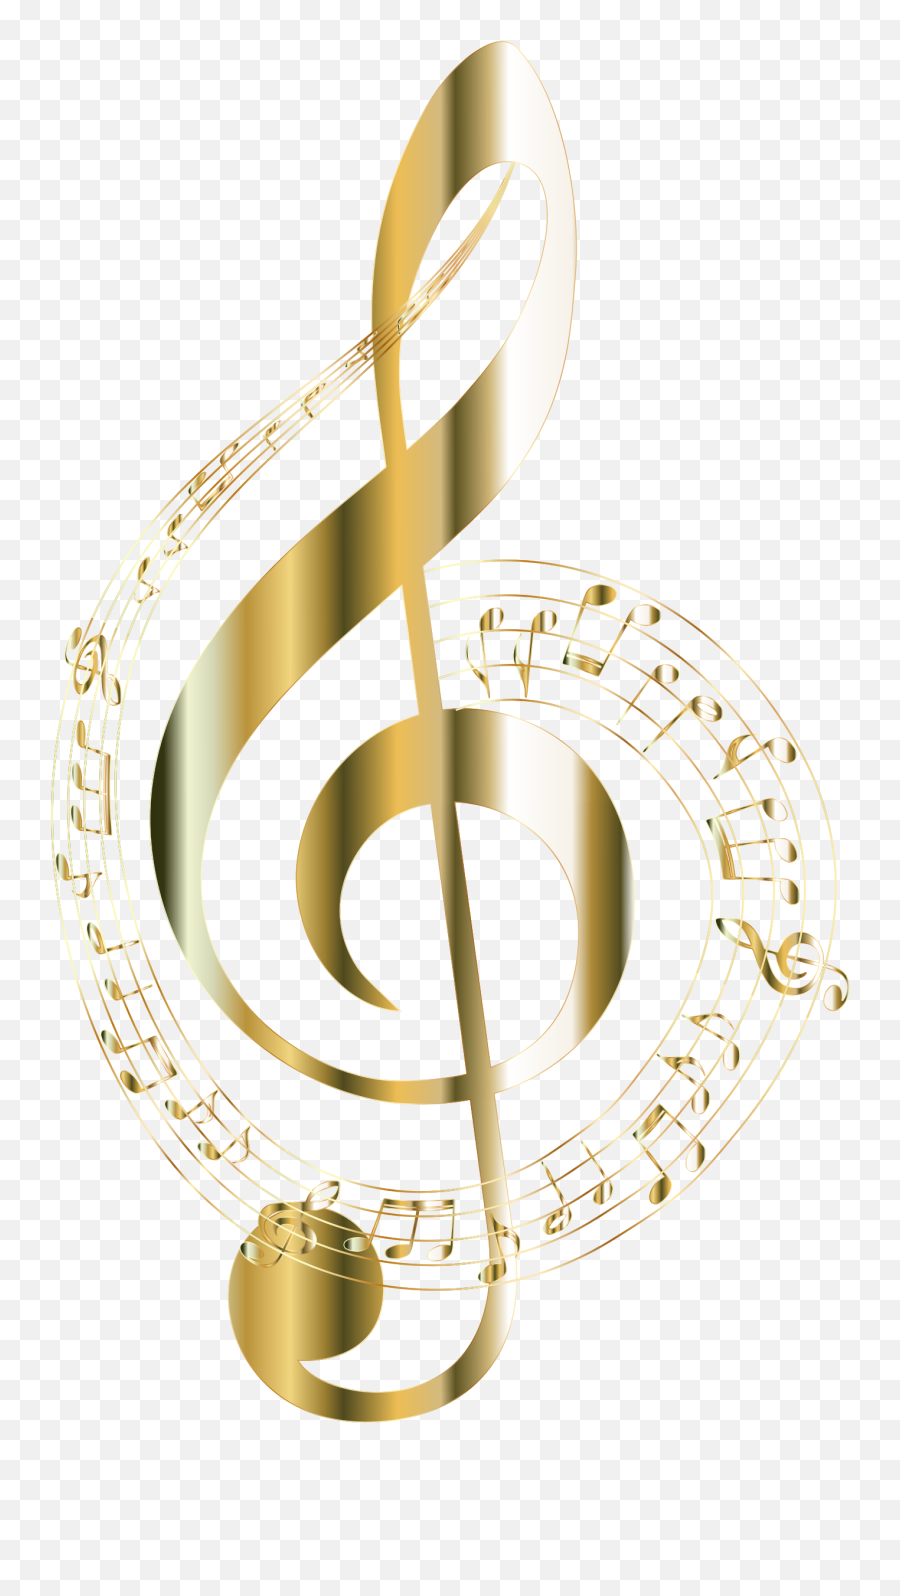 Gold Music Notes Png 4 Image Transparent Background